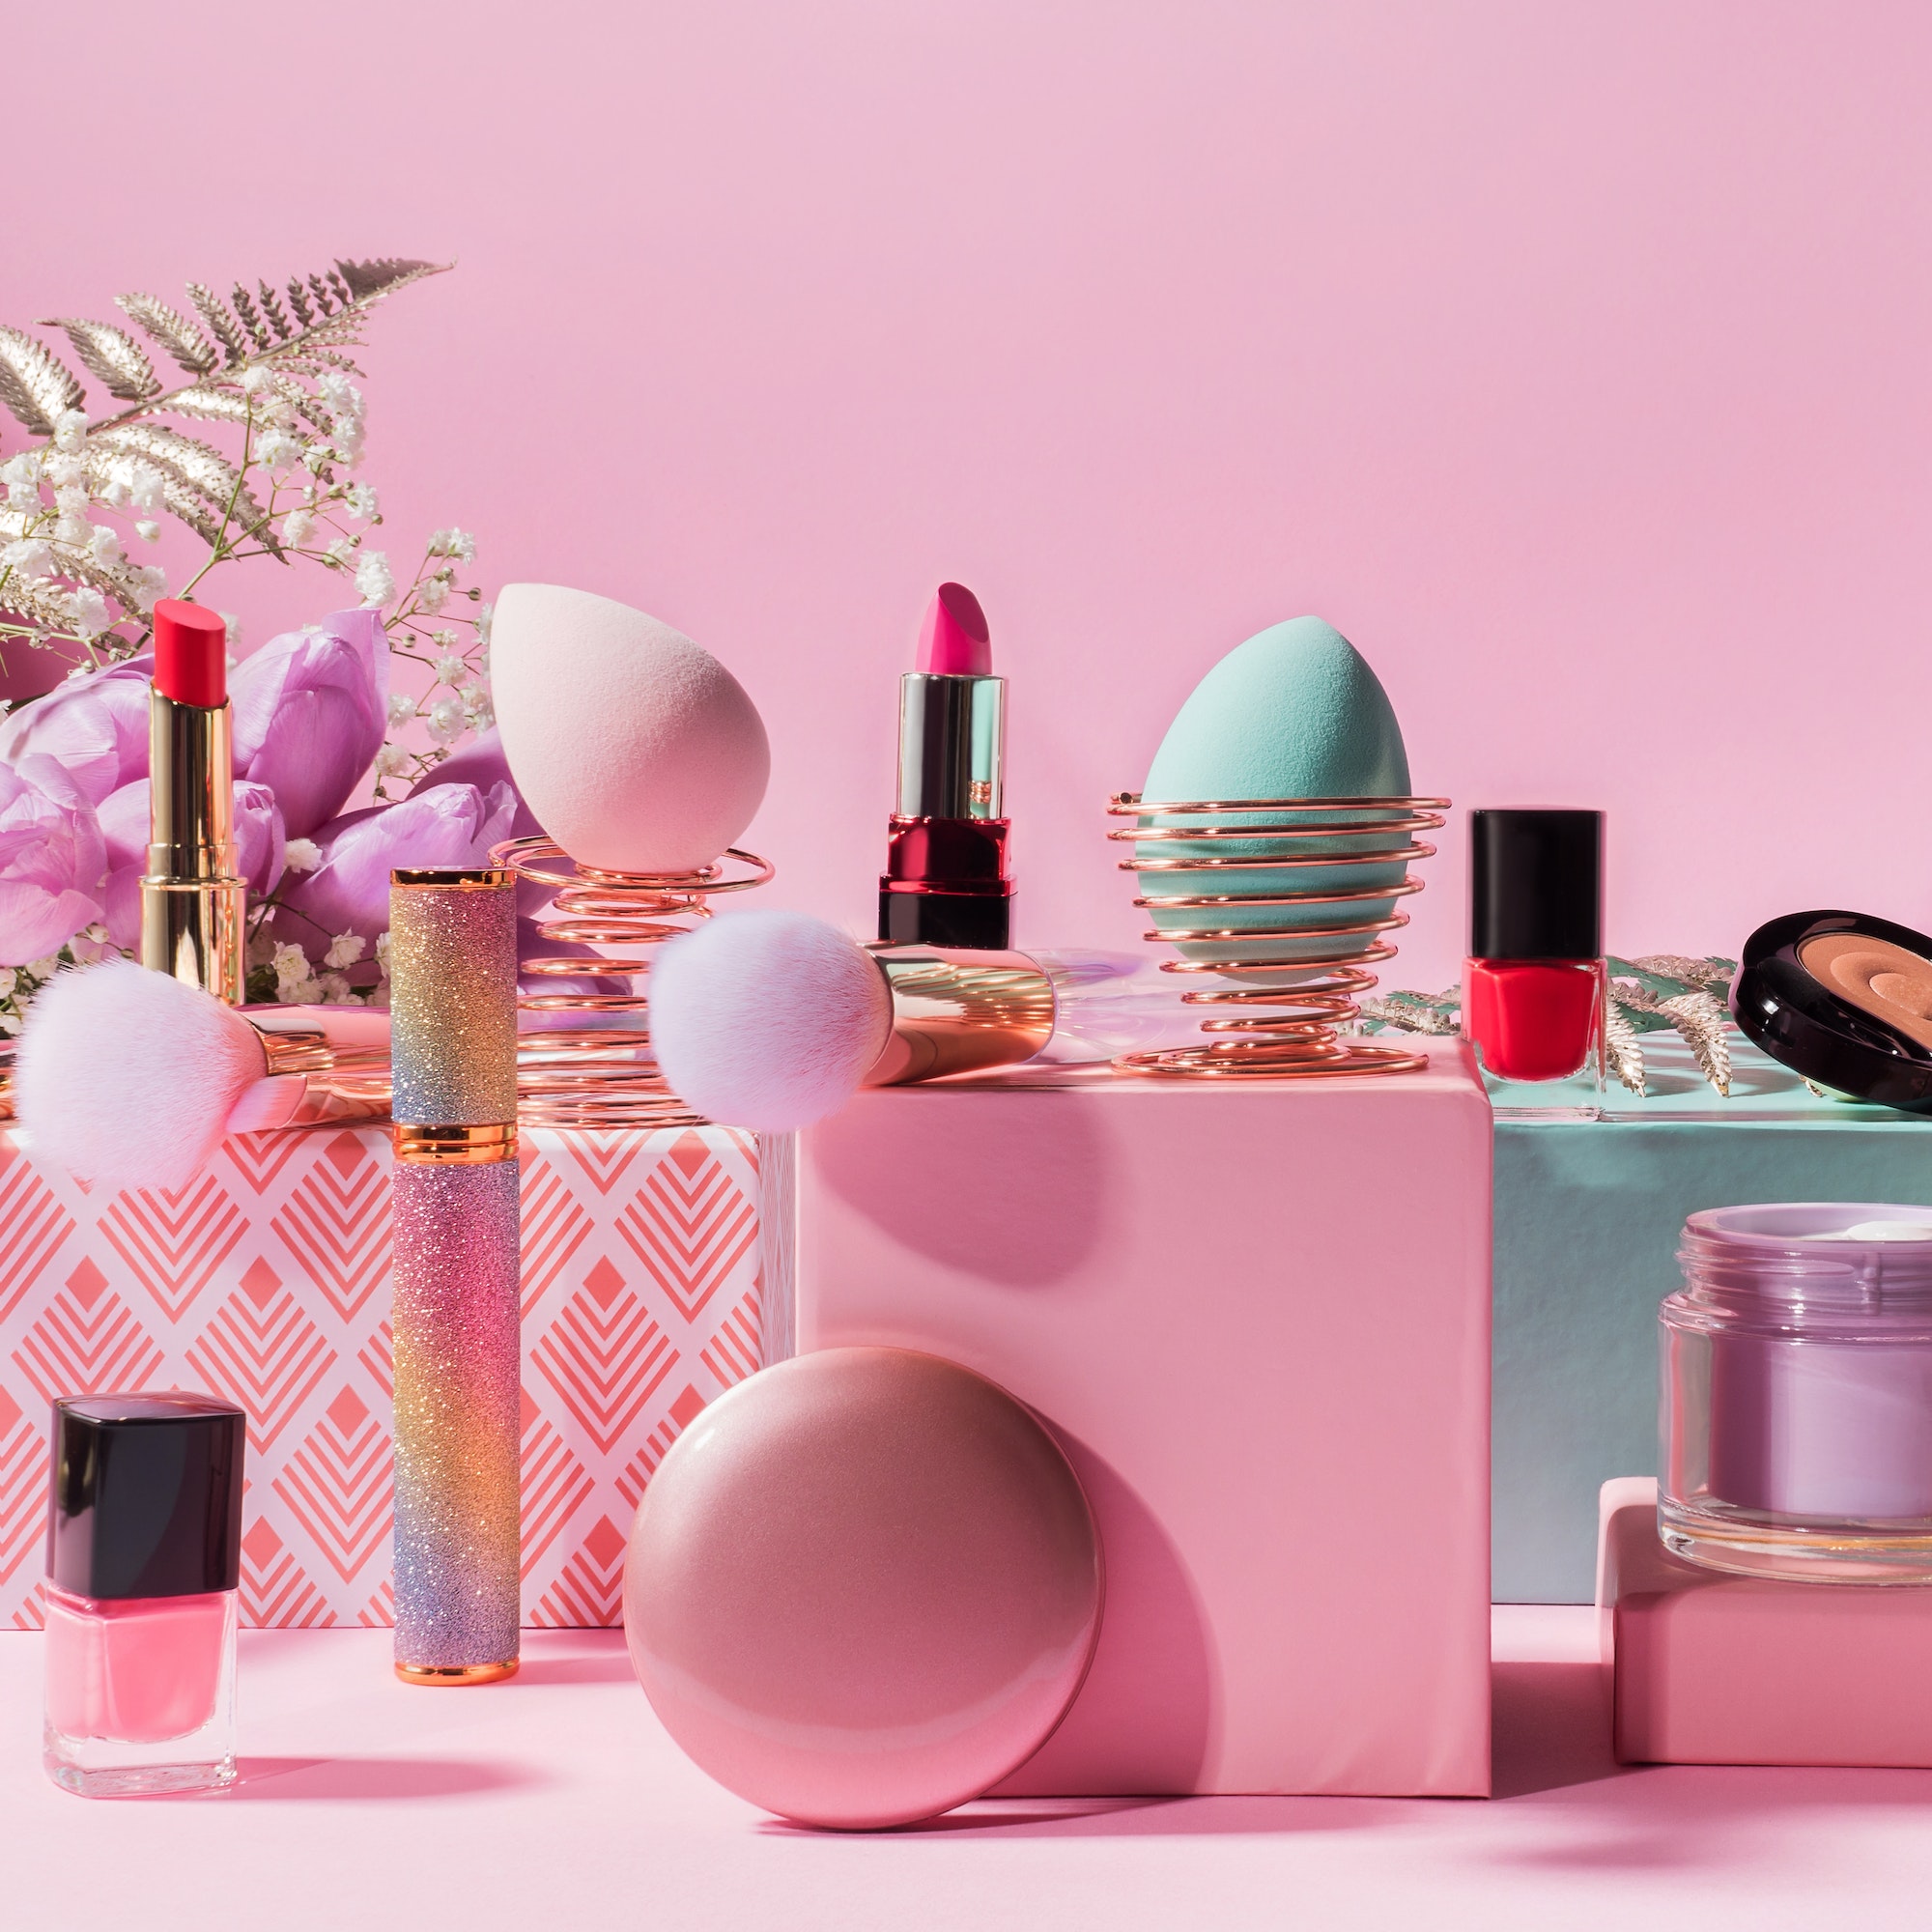 Make up tools and products on geometric podiums on pink background